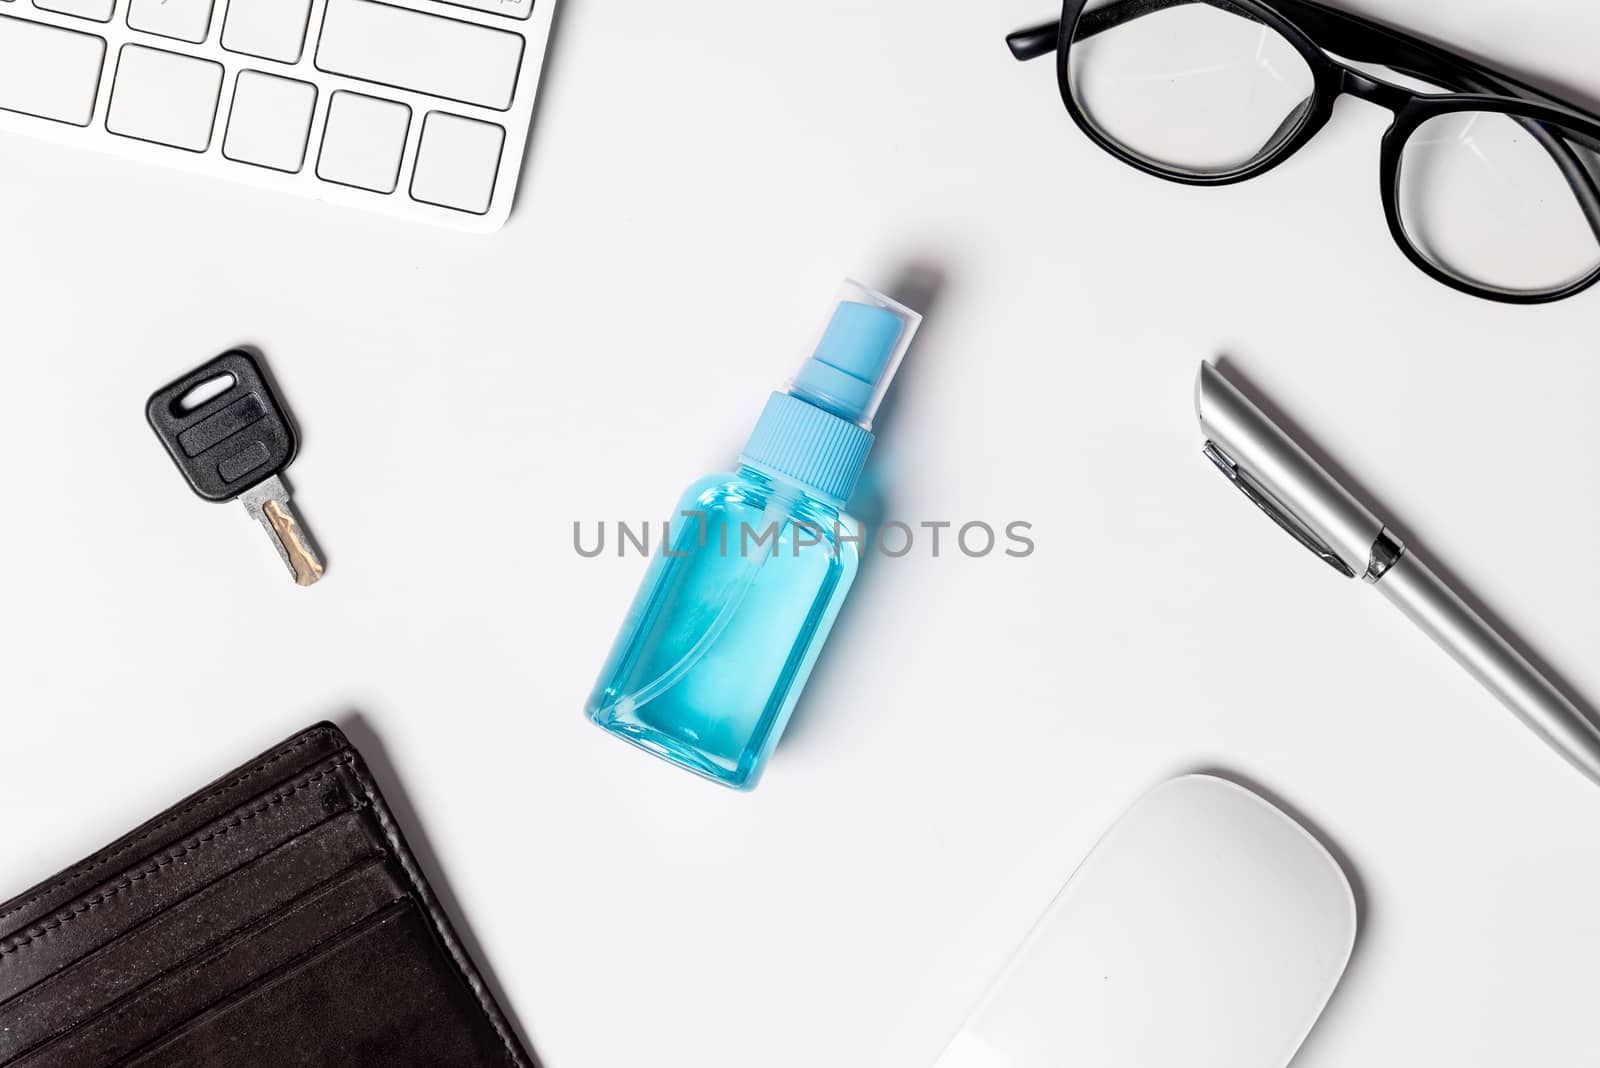 The cleaner gel for cleaning eyeglasses, pen, keyboard, mouse, wallet, key, and mobile Isolated on white background concept.